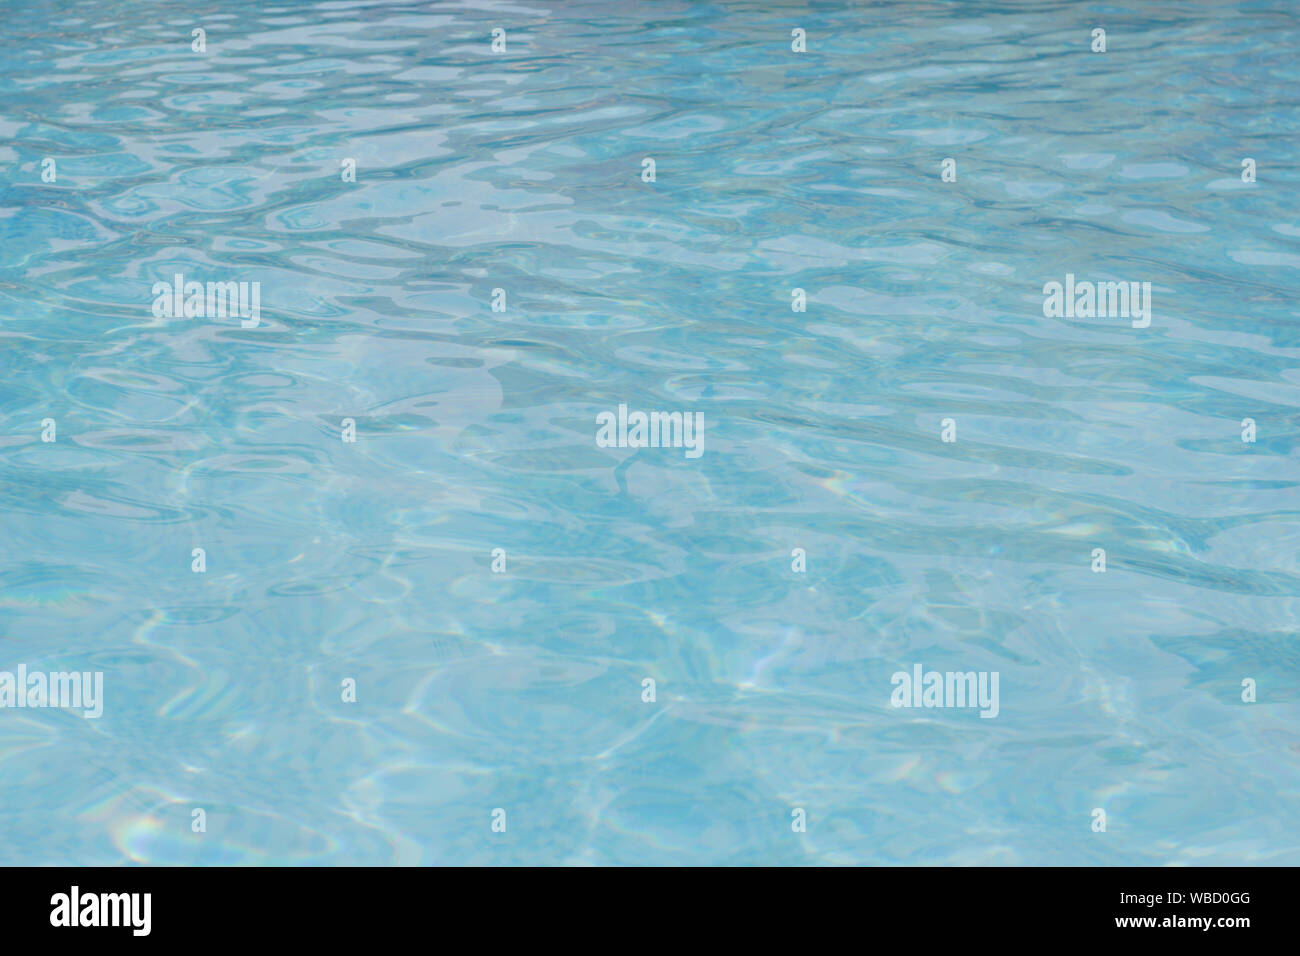 https://c8.alamy.com/comp/WBD0GG/ripple-of-pool-water-with-sun-reflection-blue-pool-rippled-water-WBD0GG.jpg